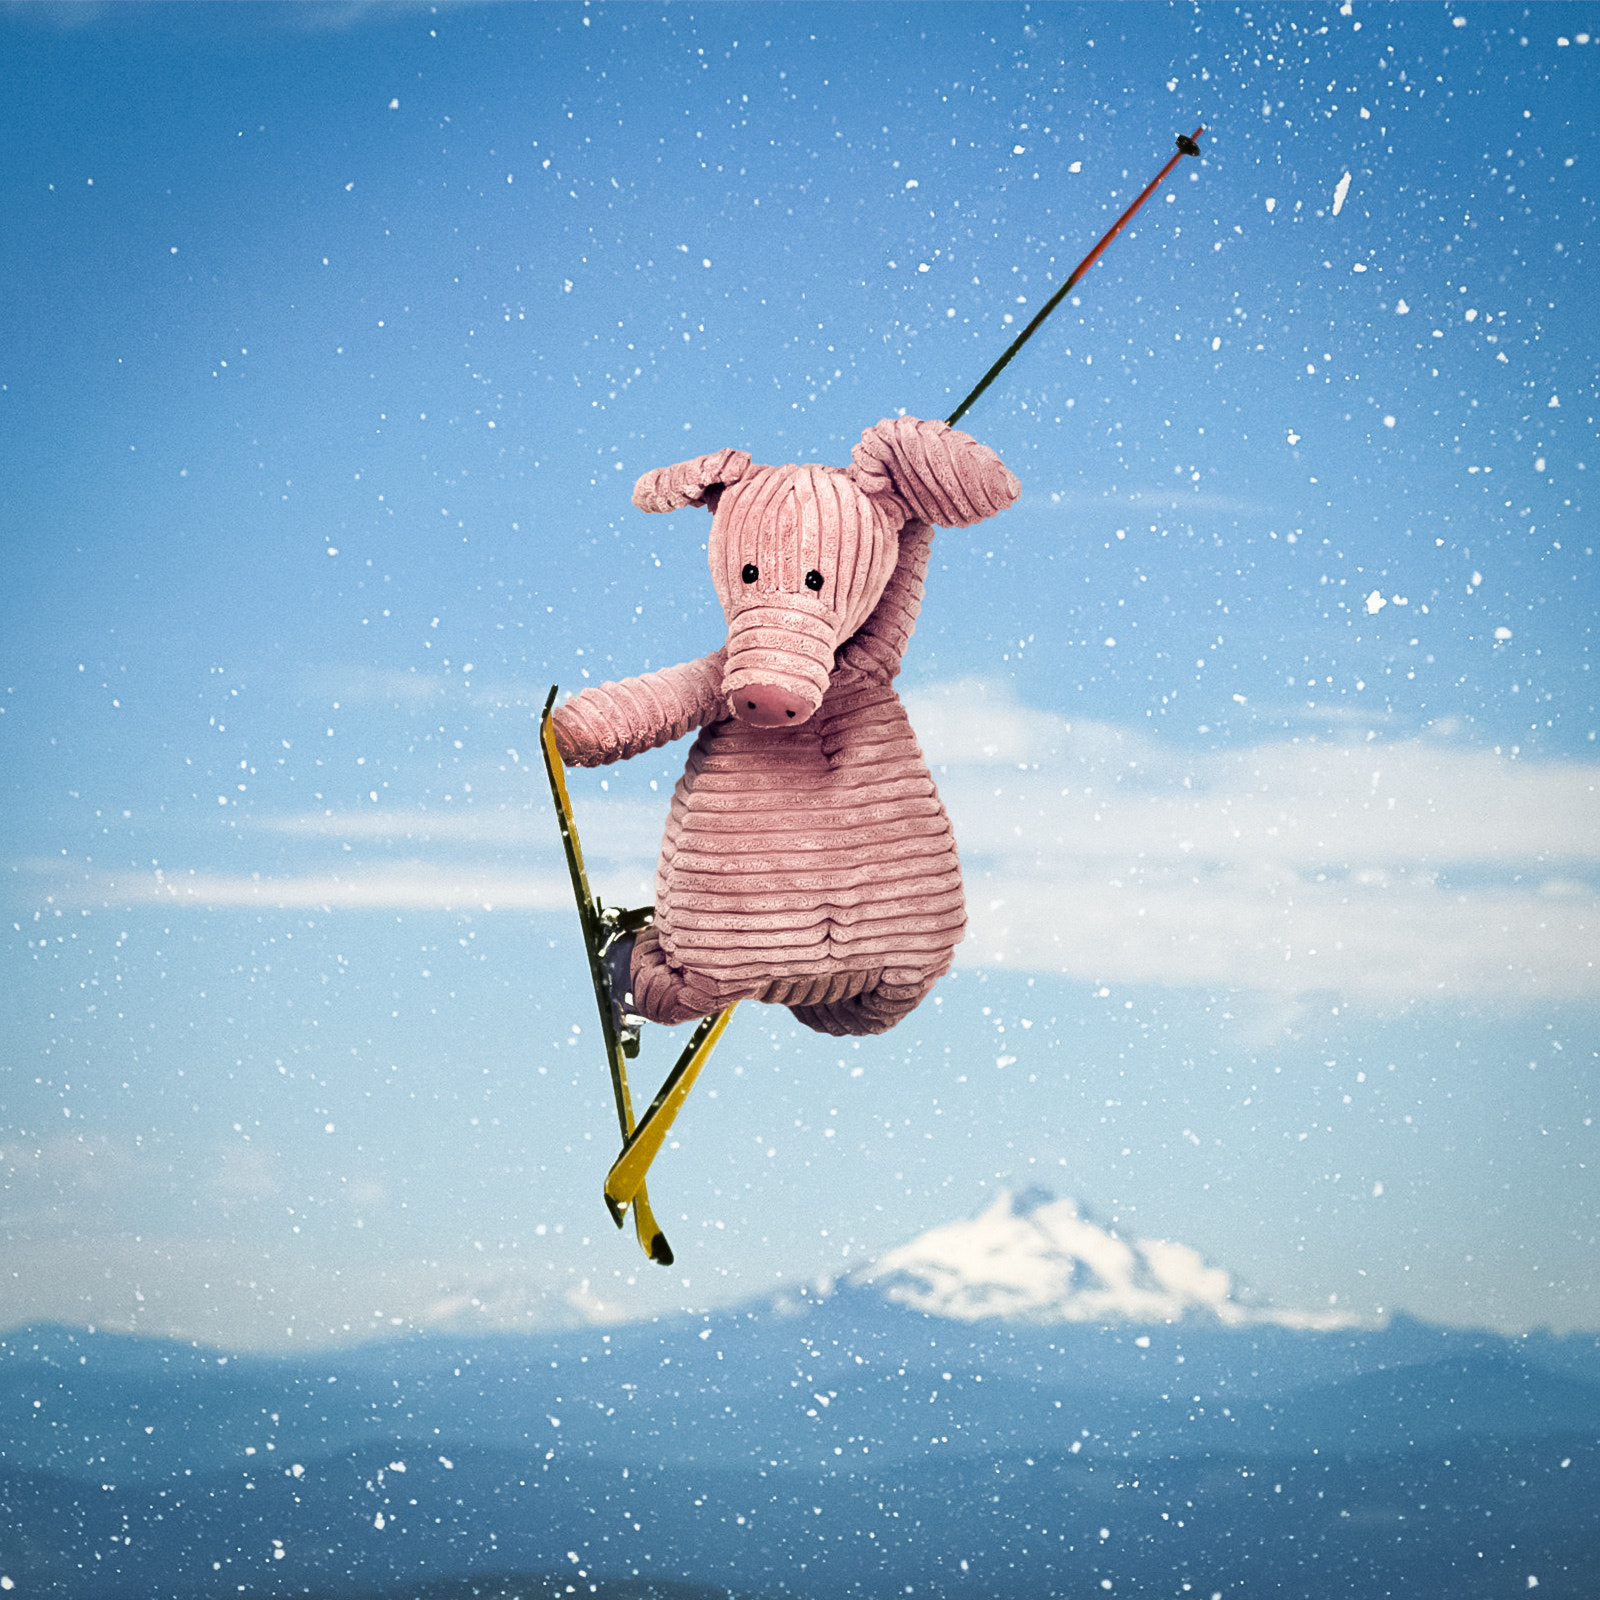 Olympus OM-D E-M5 sample photo. Piggy skiing collage photography